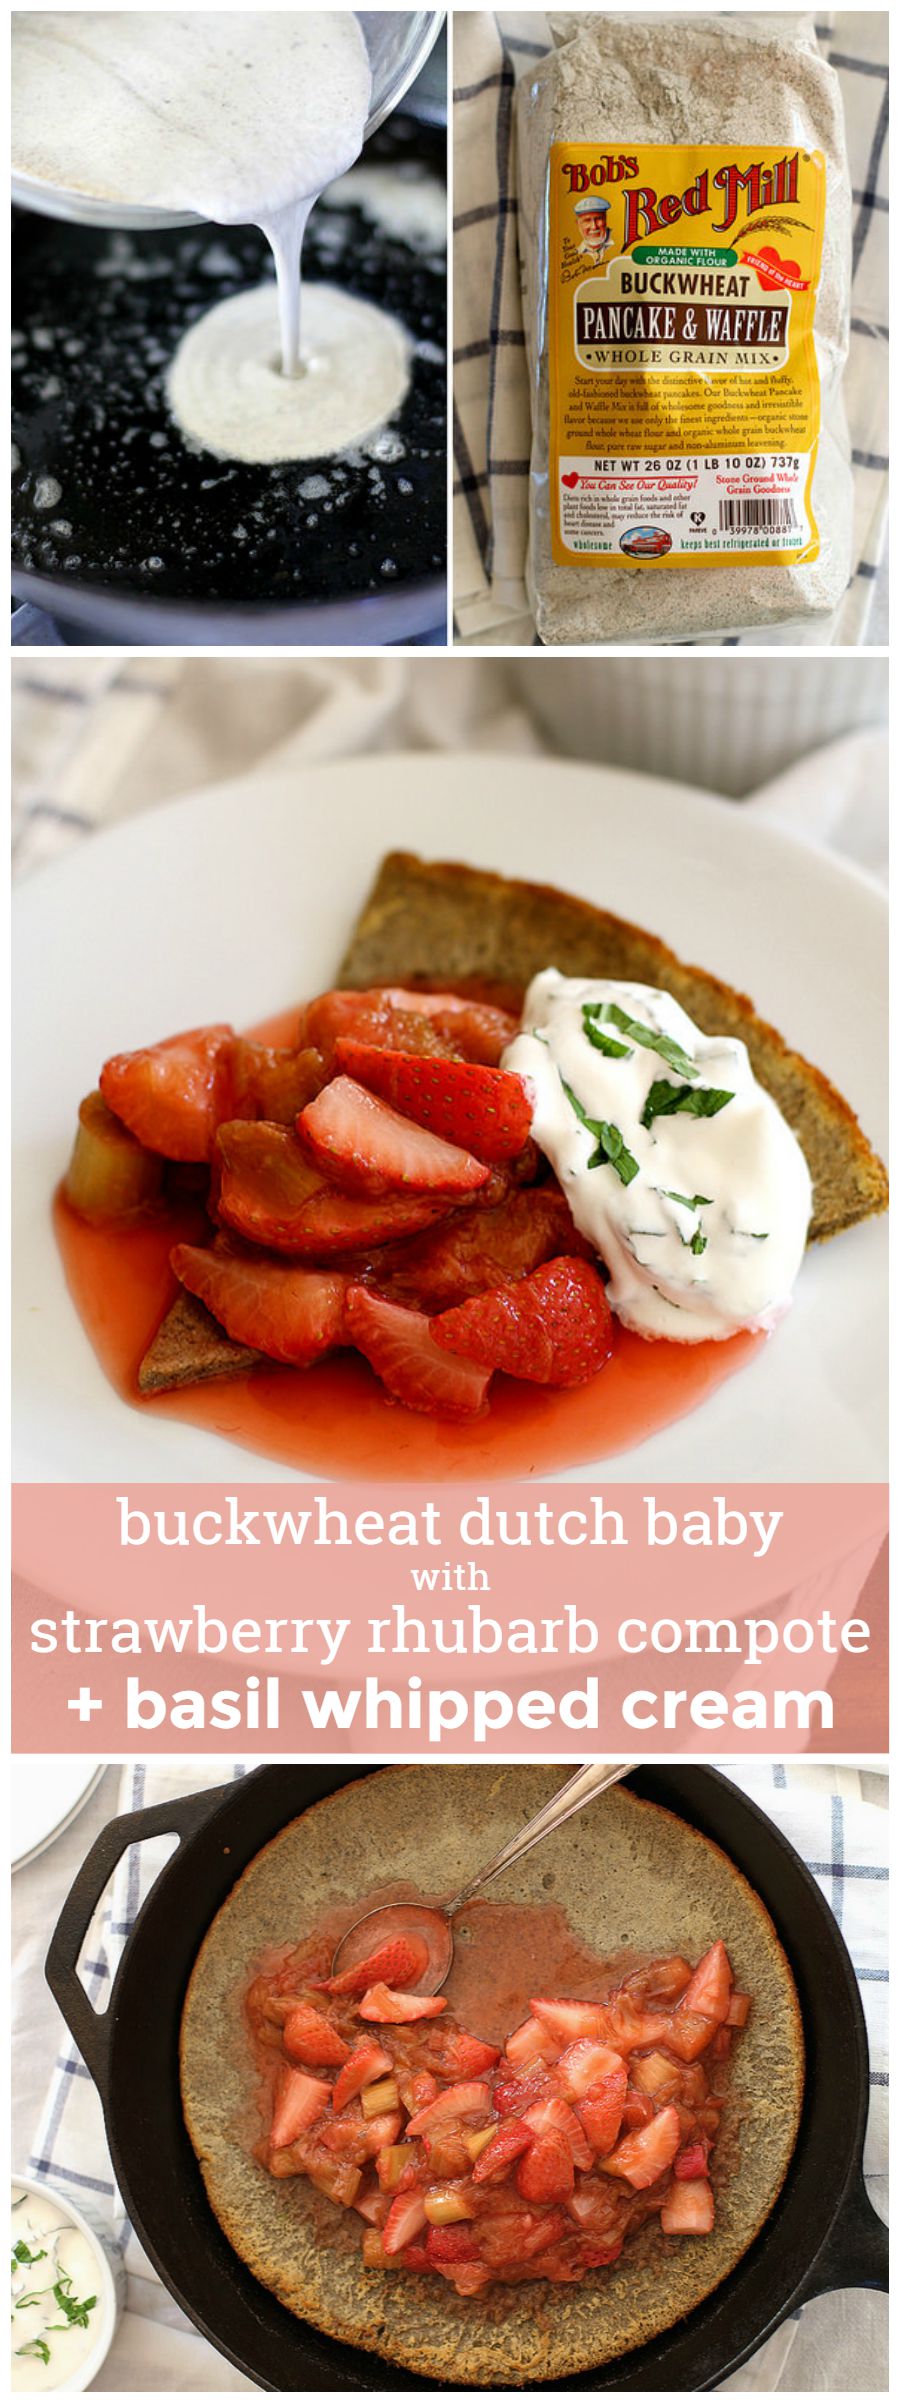 Buckwheat Dutch Baby with Strawberry Rhubarb Compote and Basil Whipped Cream -- perfect for weekend brunch. girlversusdough.com @girlversusdough